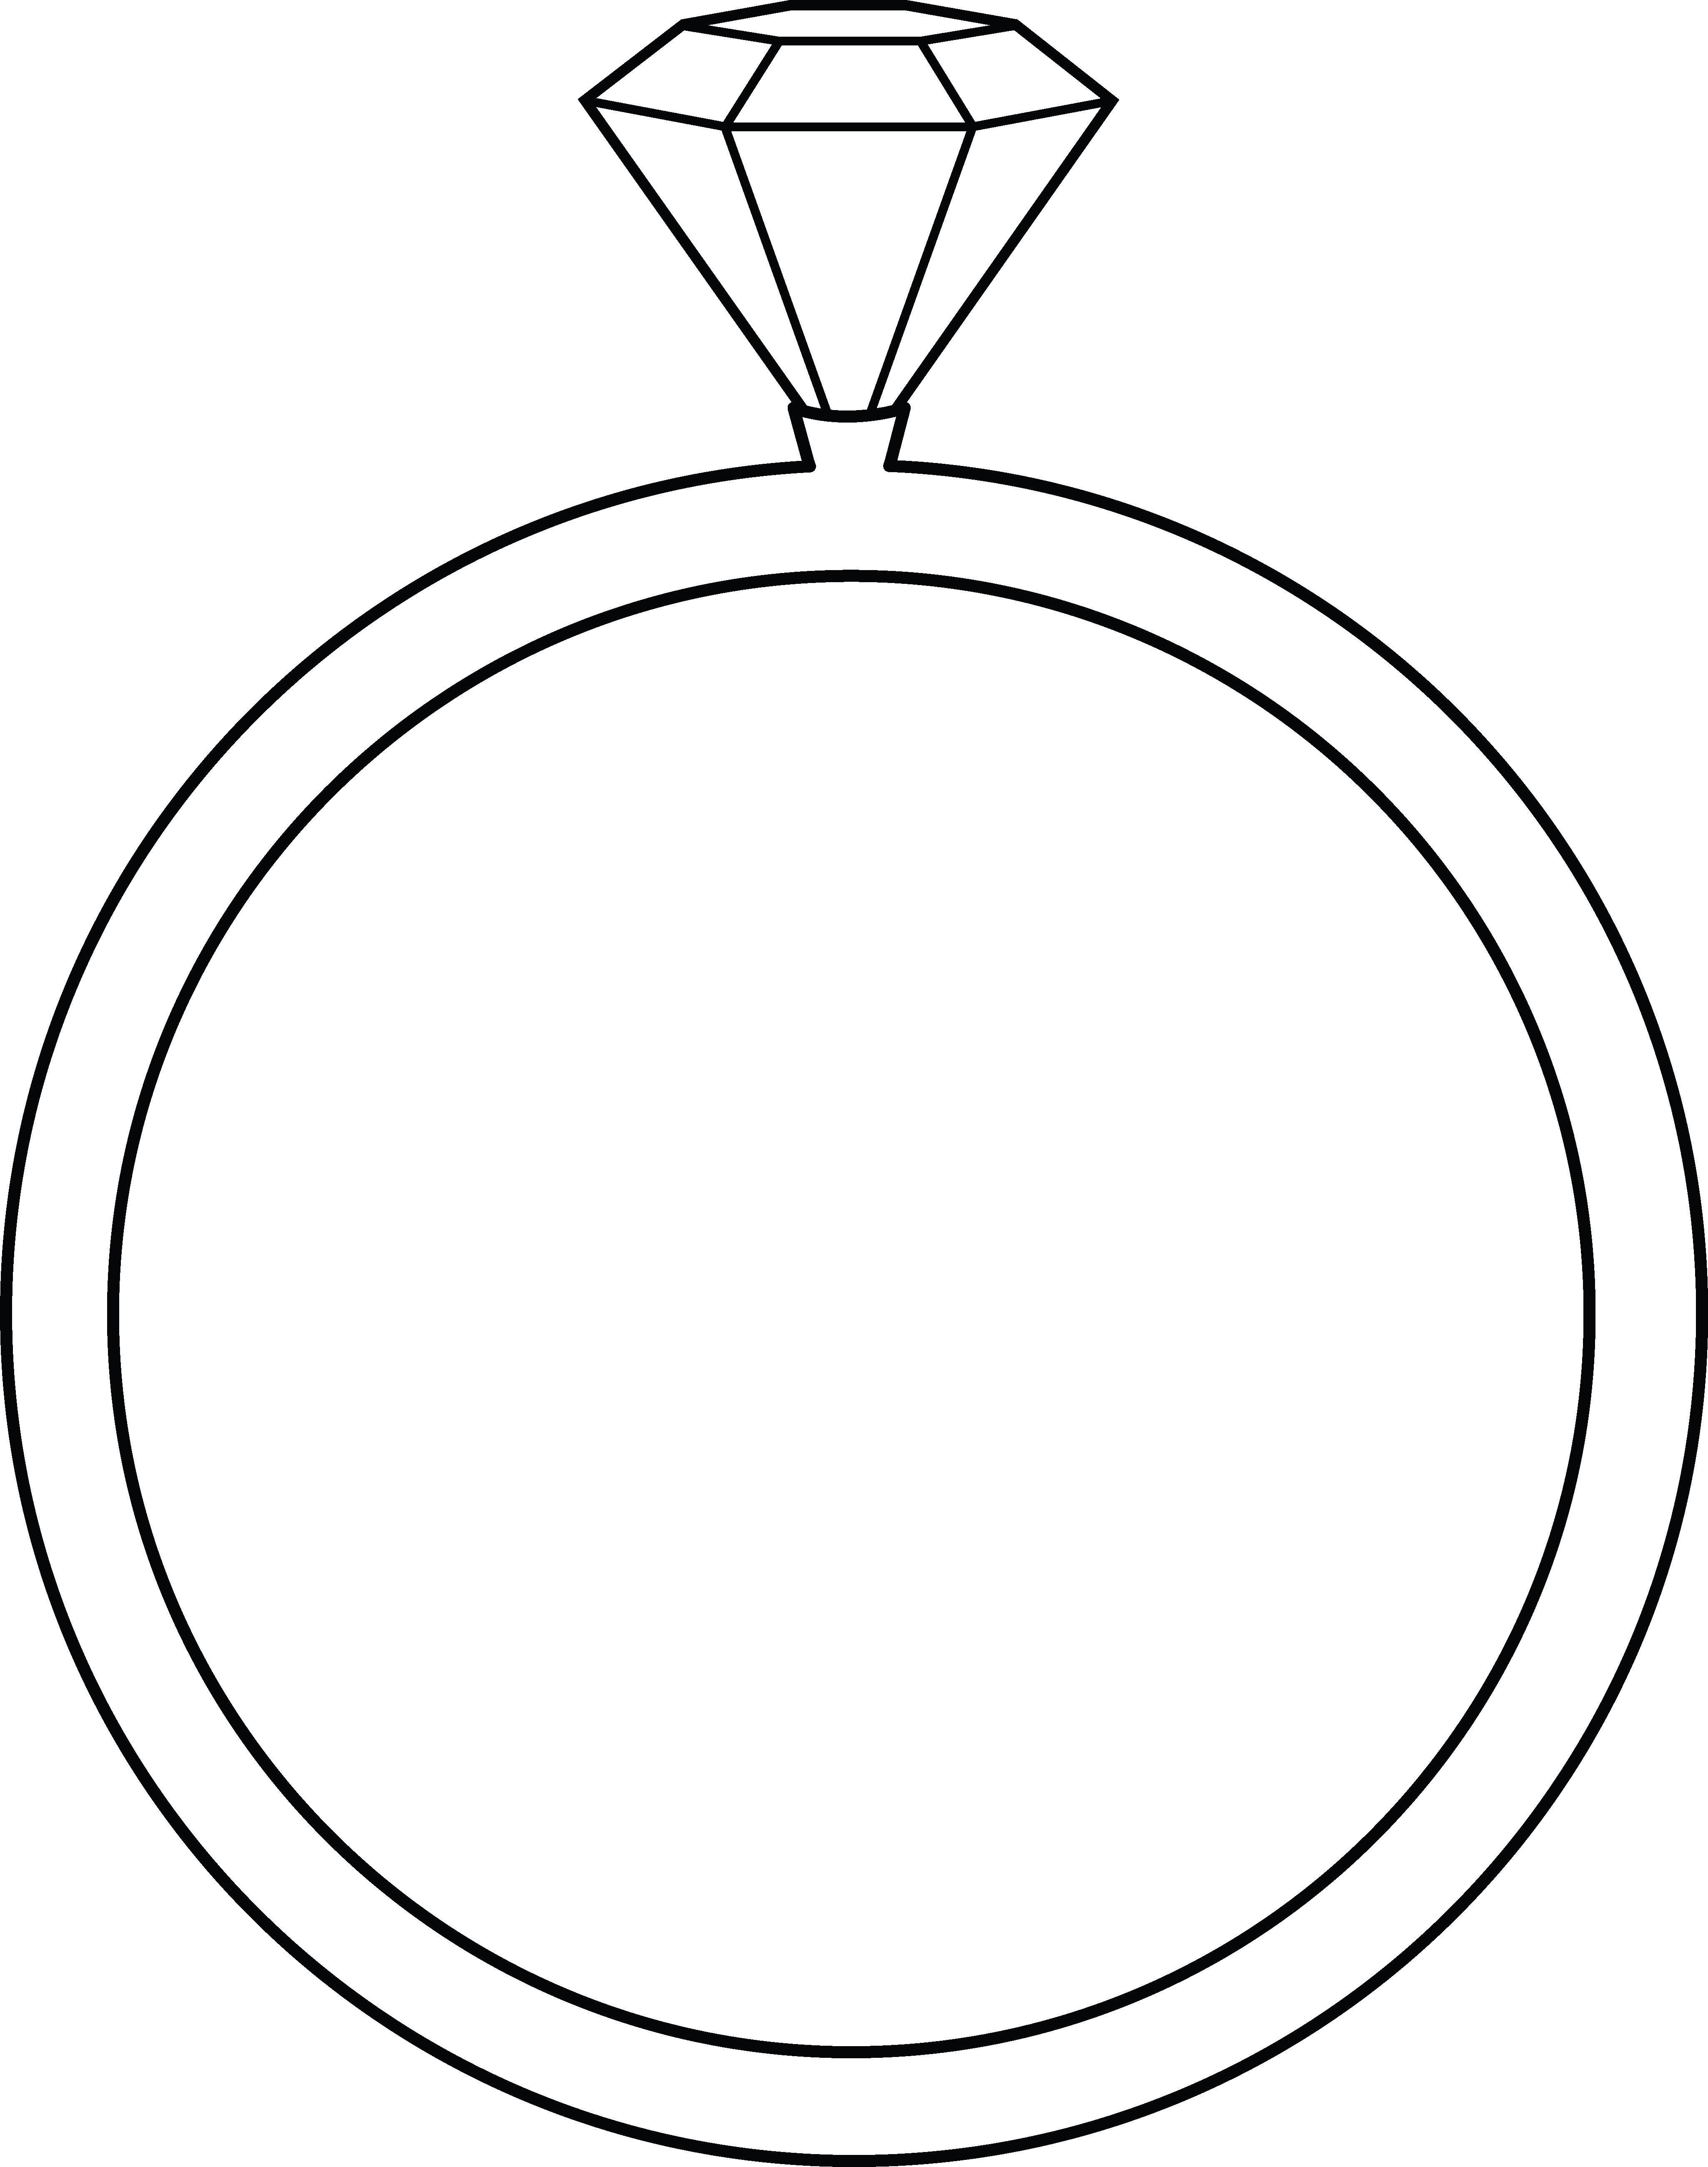 Free White Ring Cliparts, Download Free Clip Art, Free Clip Art on